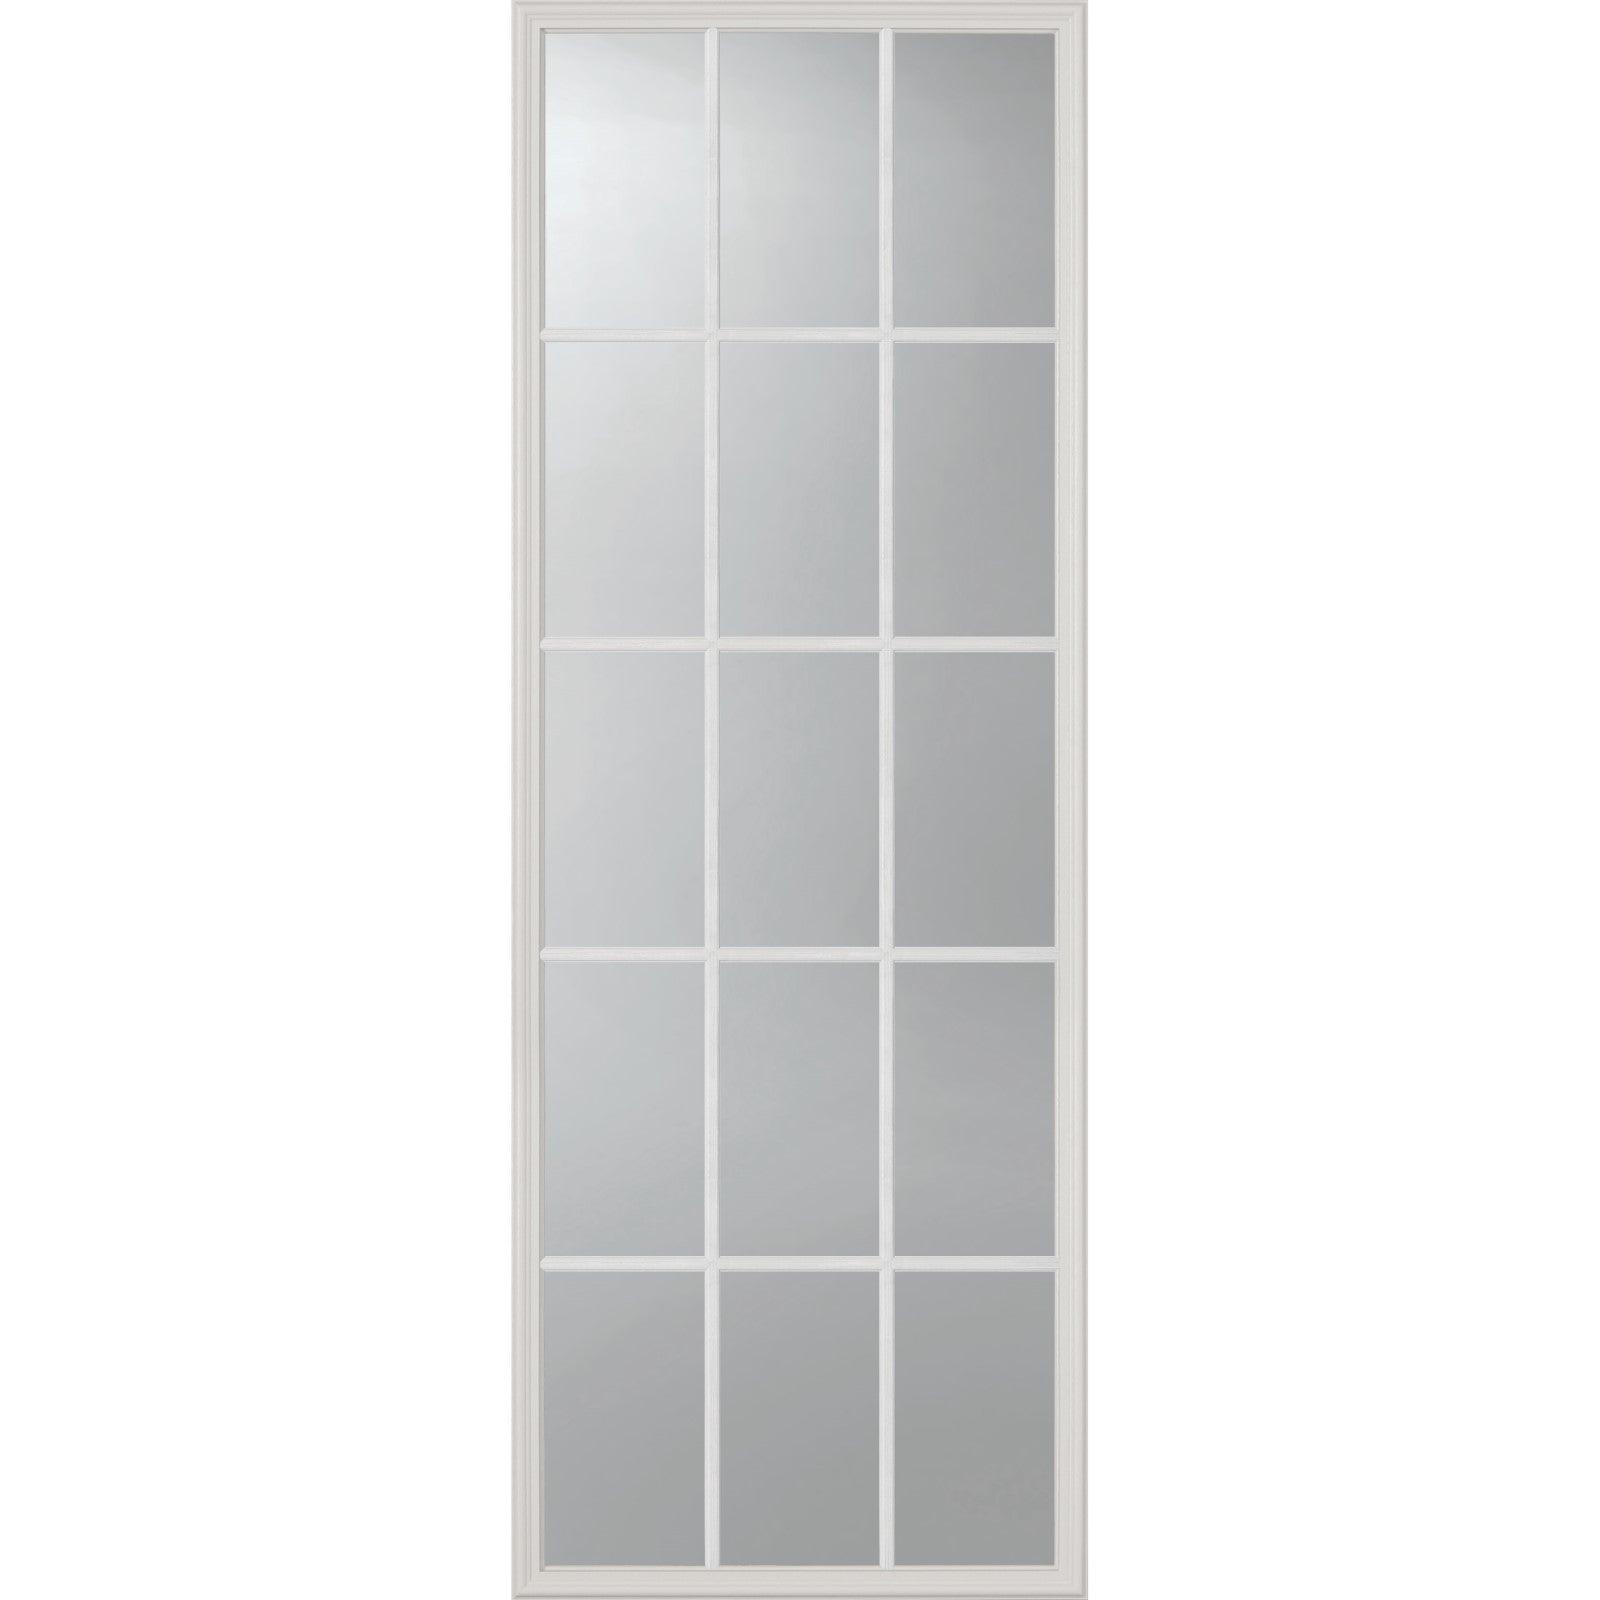 Clear 15 Lite Glass and Frame Kit (Full Lite) – Pease Doors: The